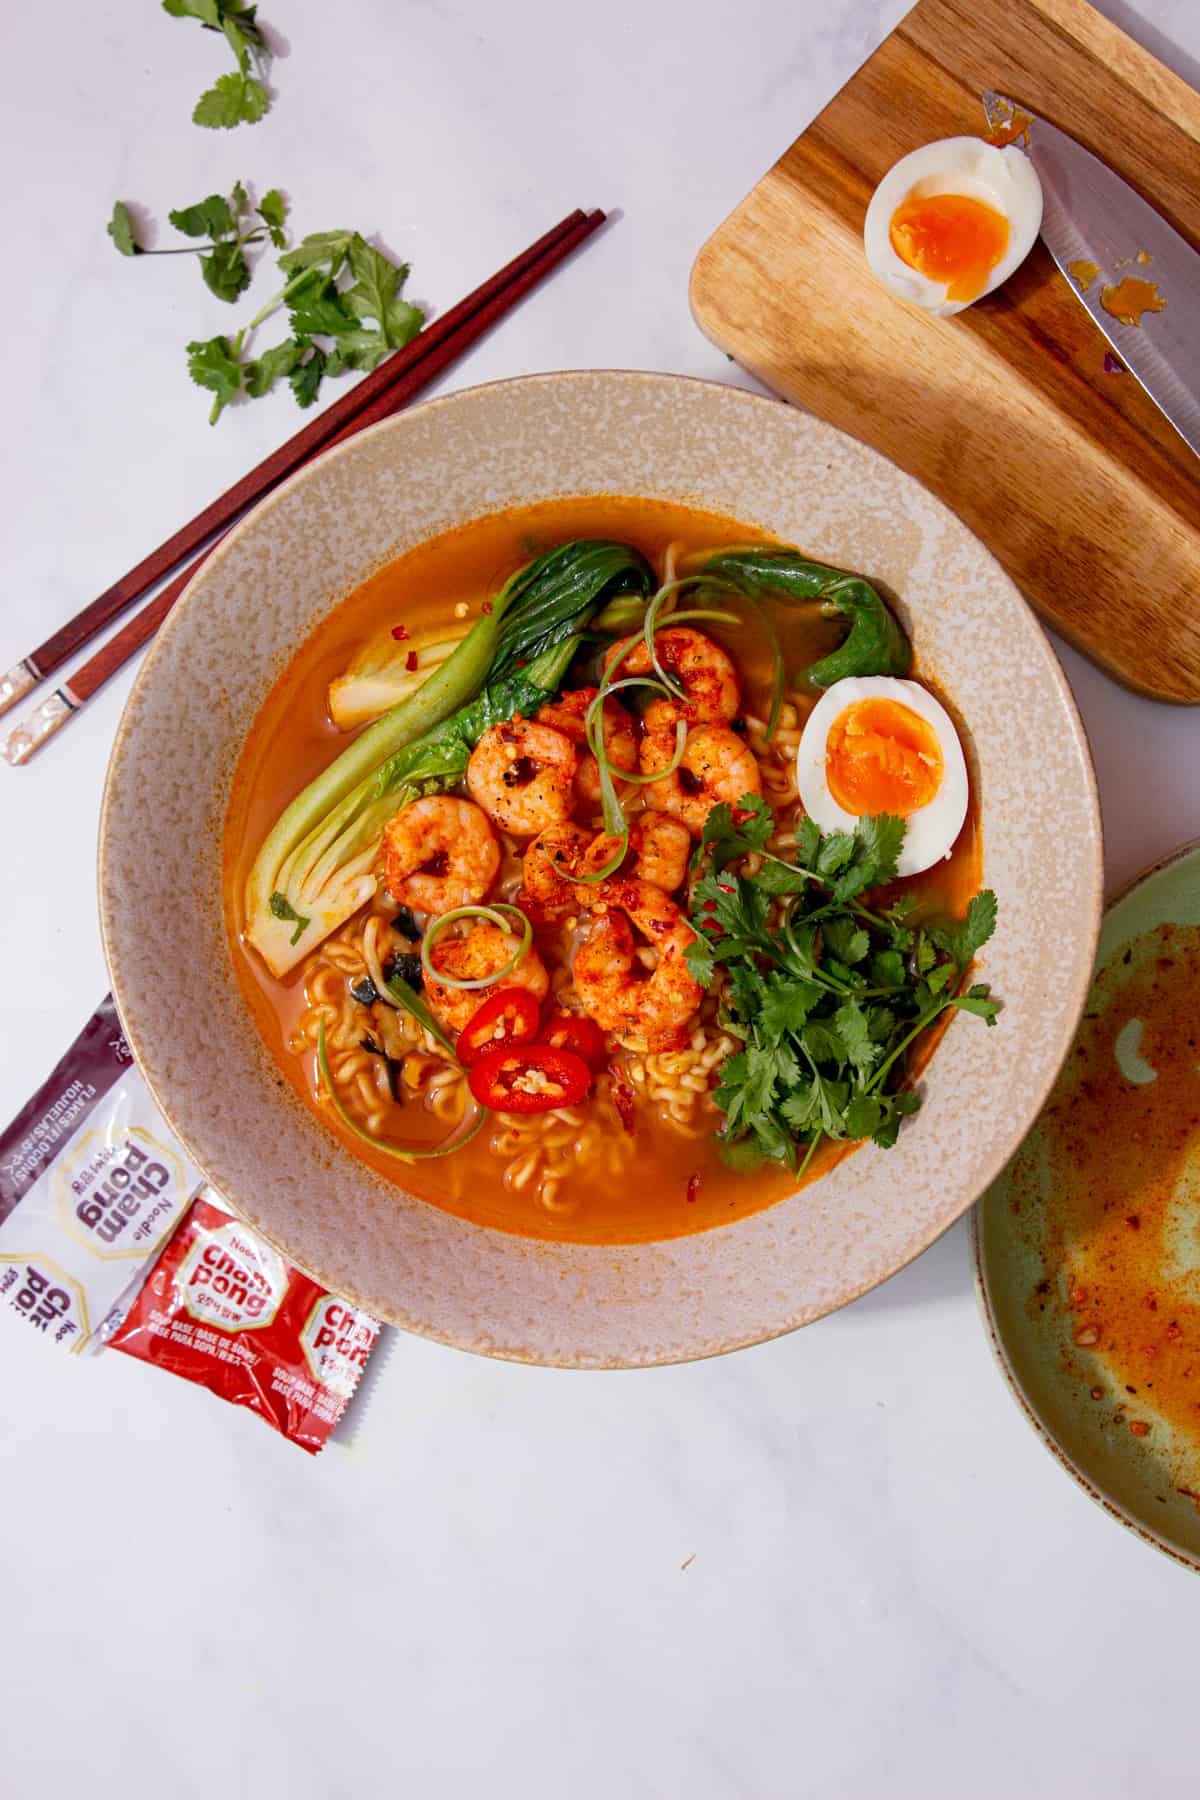 A bowl of prawn ramen with pak choi, coriander, chillies, half an egg in the broth next to some chop sticks and the other half of the egg on a chopping board. 